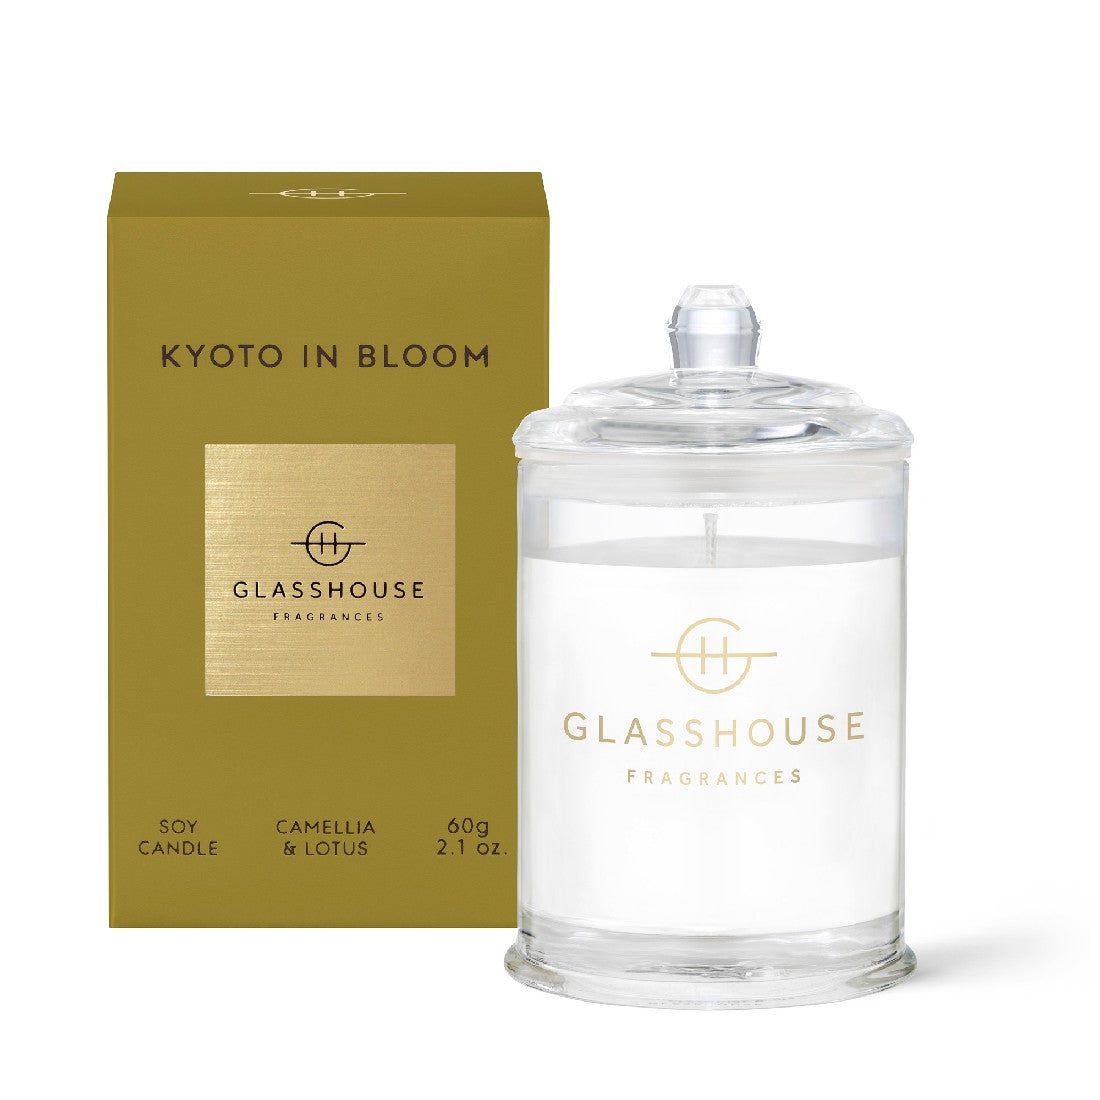 GLASSHOUSE MINI CANDLE KYOTO IN BLOOM